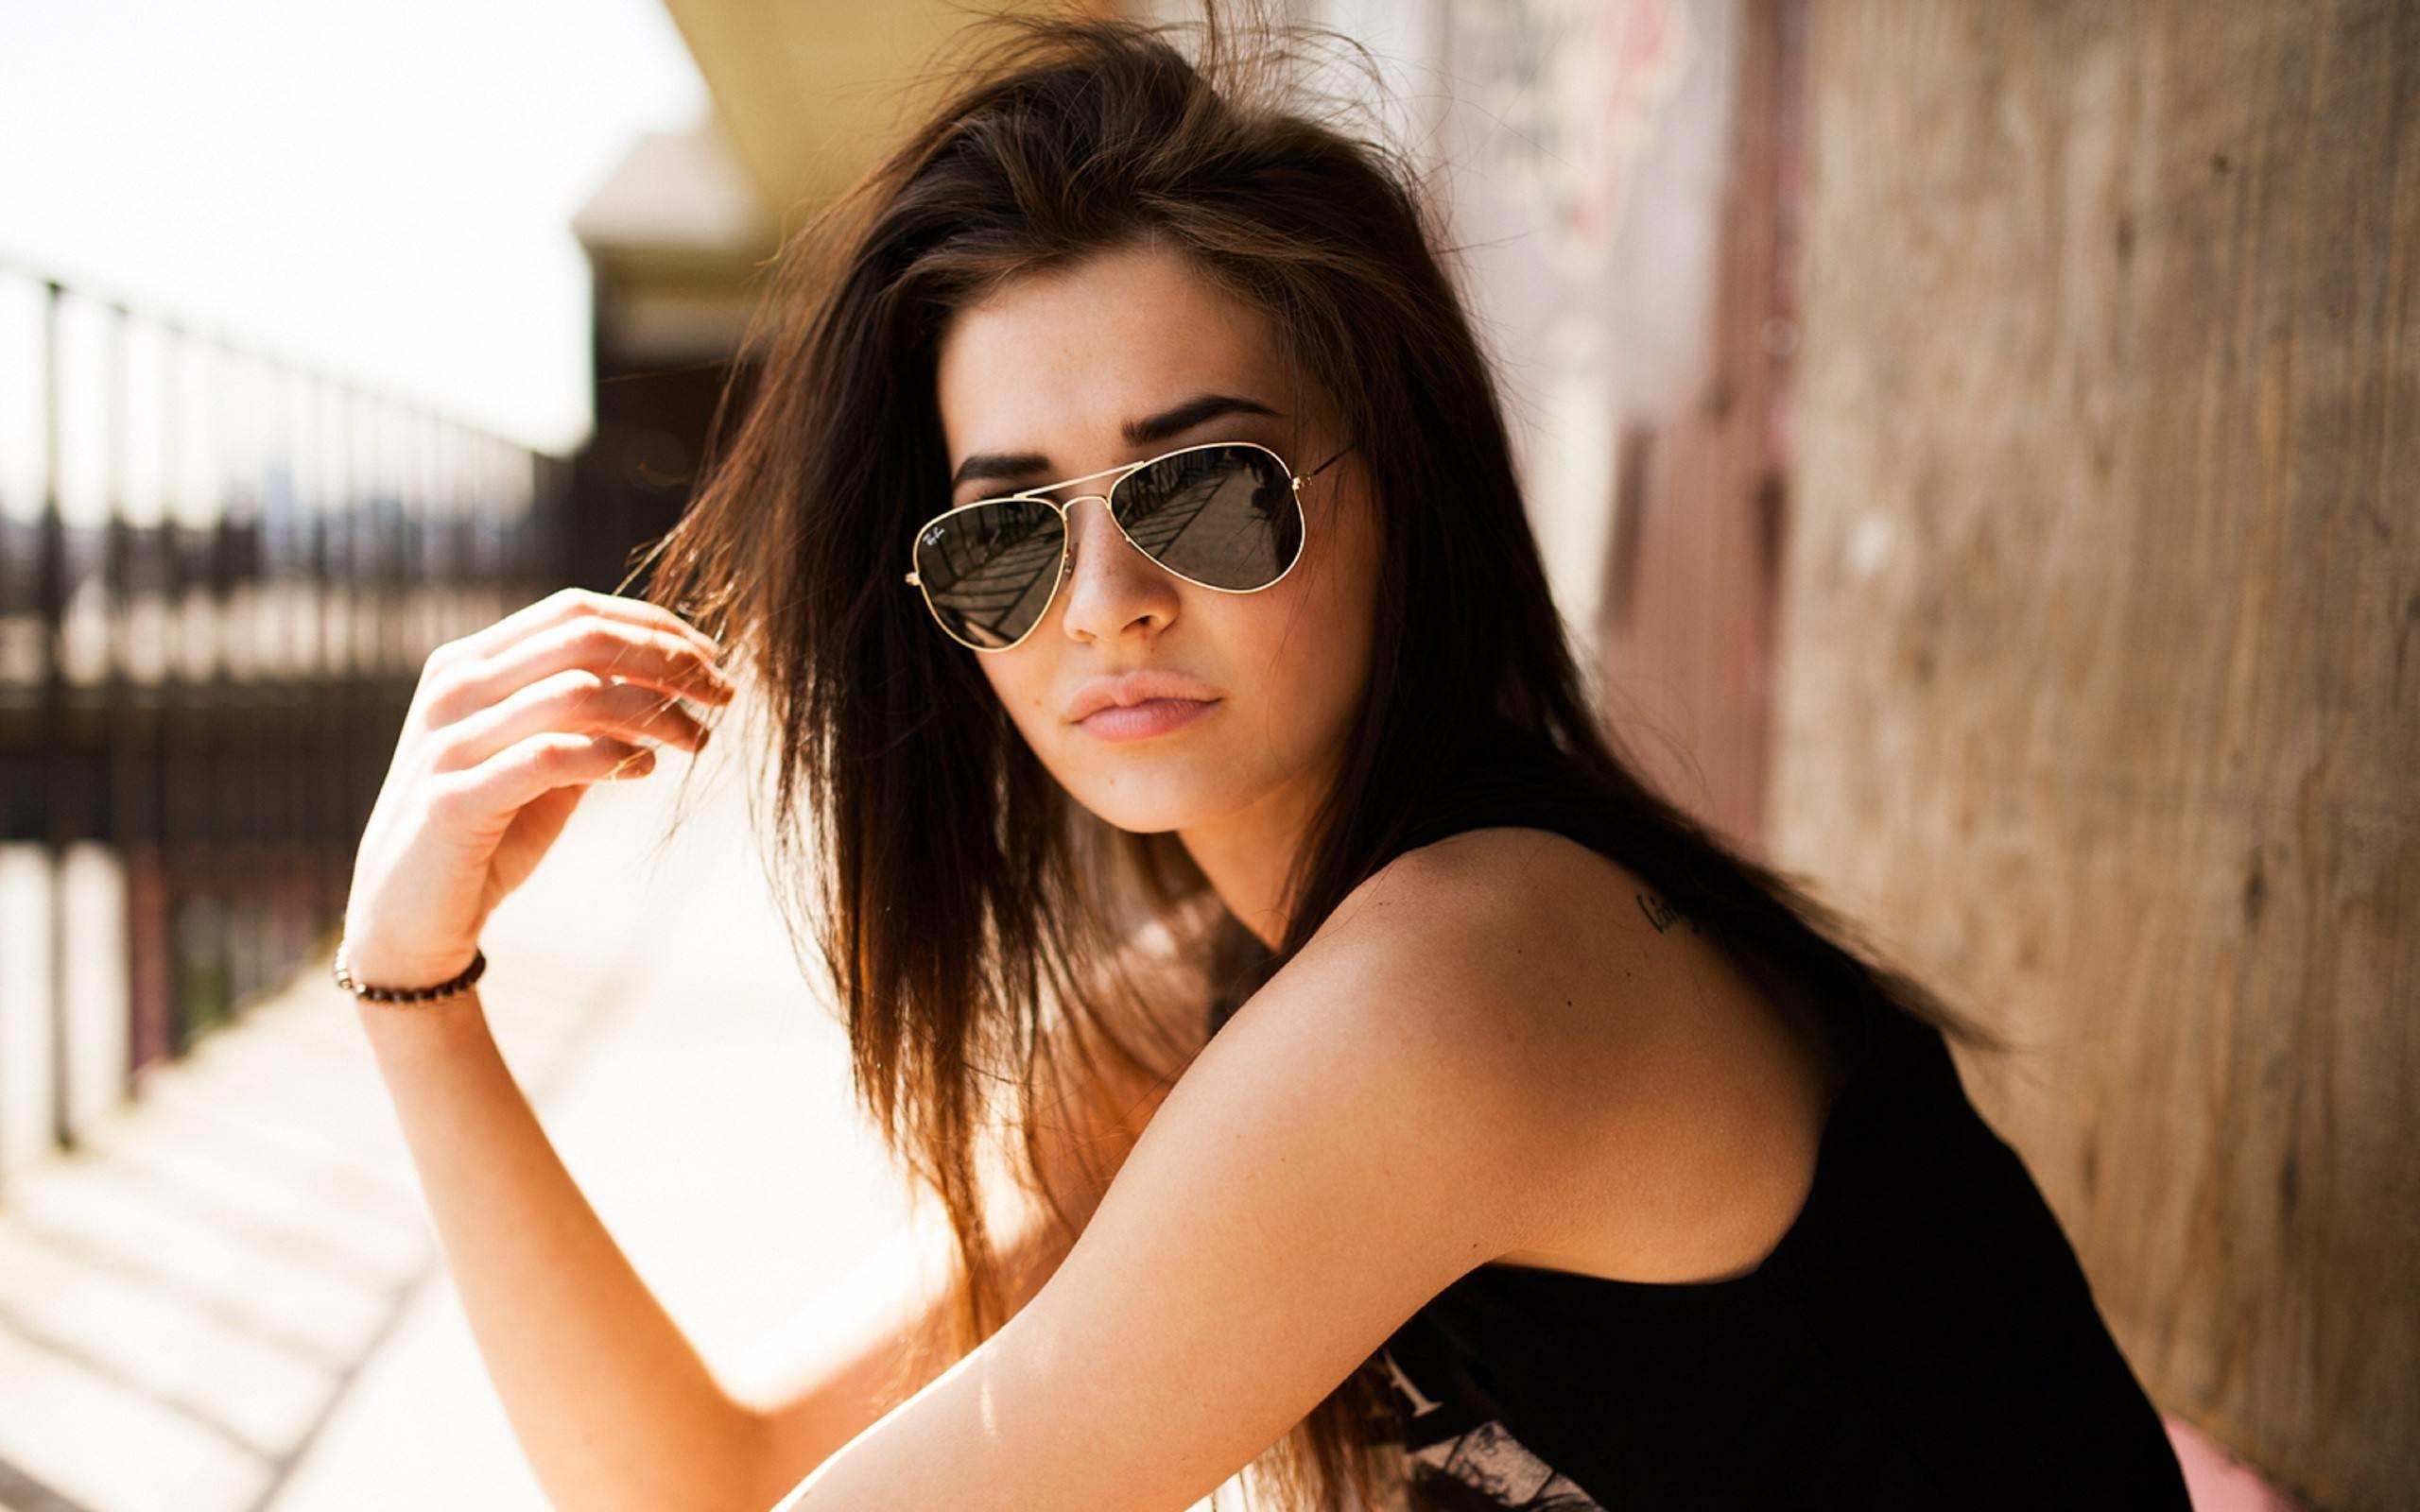 Six Types of Sunglasses You Should Never Use